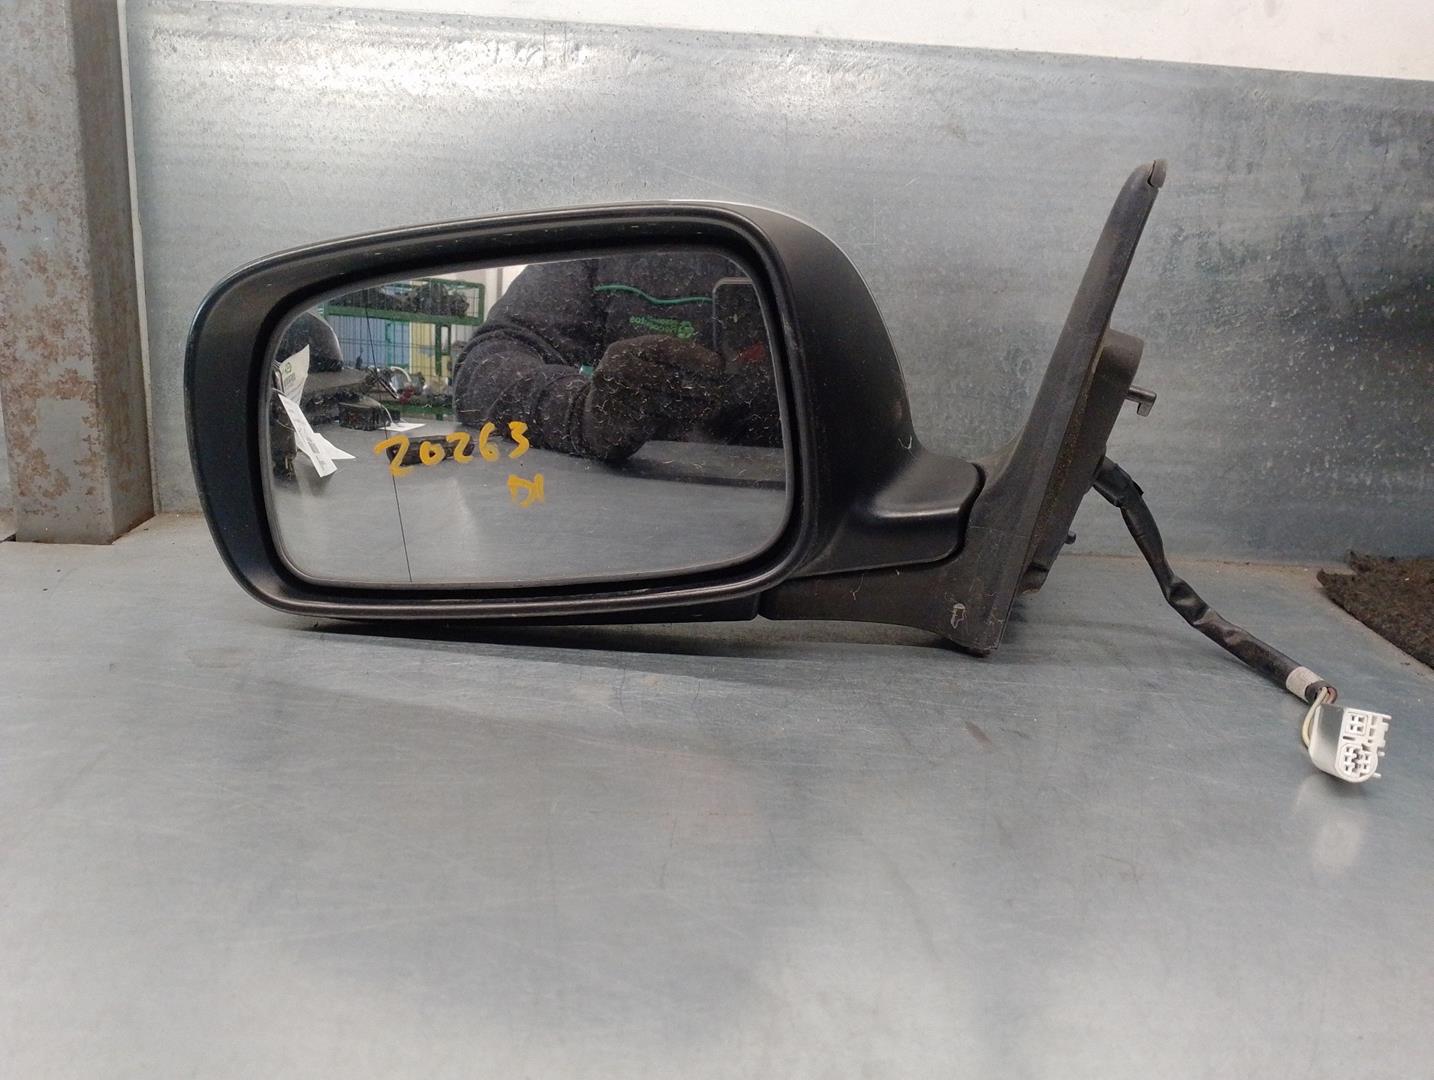 TOYOTA Avensis 2 generation (2002-2009) Left Side Wing Mirror 8790605100, 7PINES, 5PUERTAS 24342567